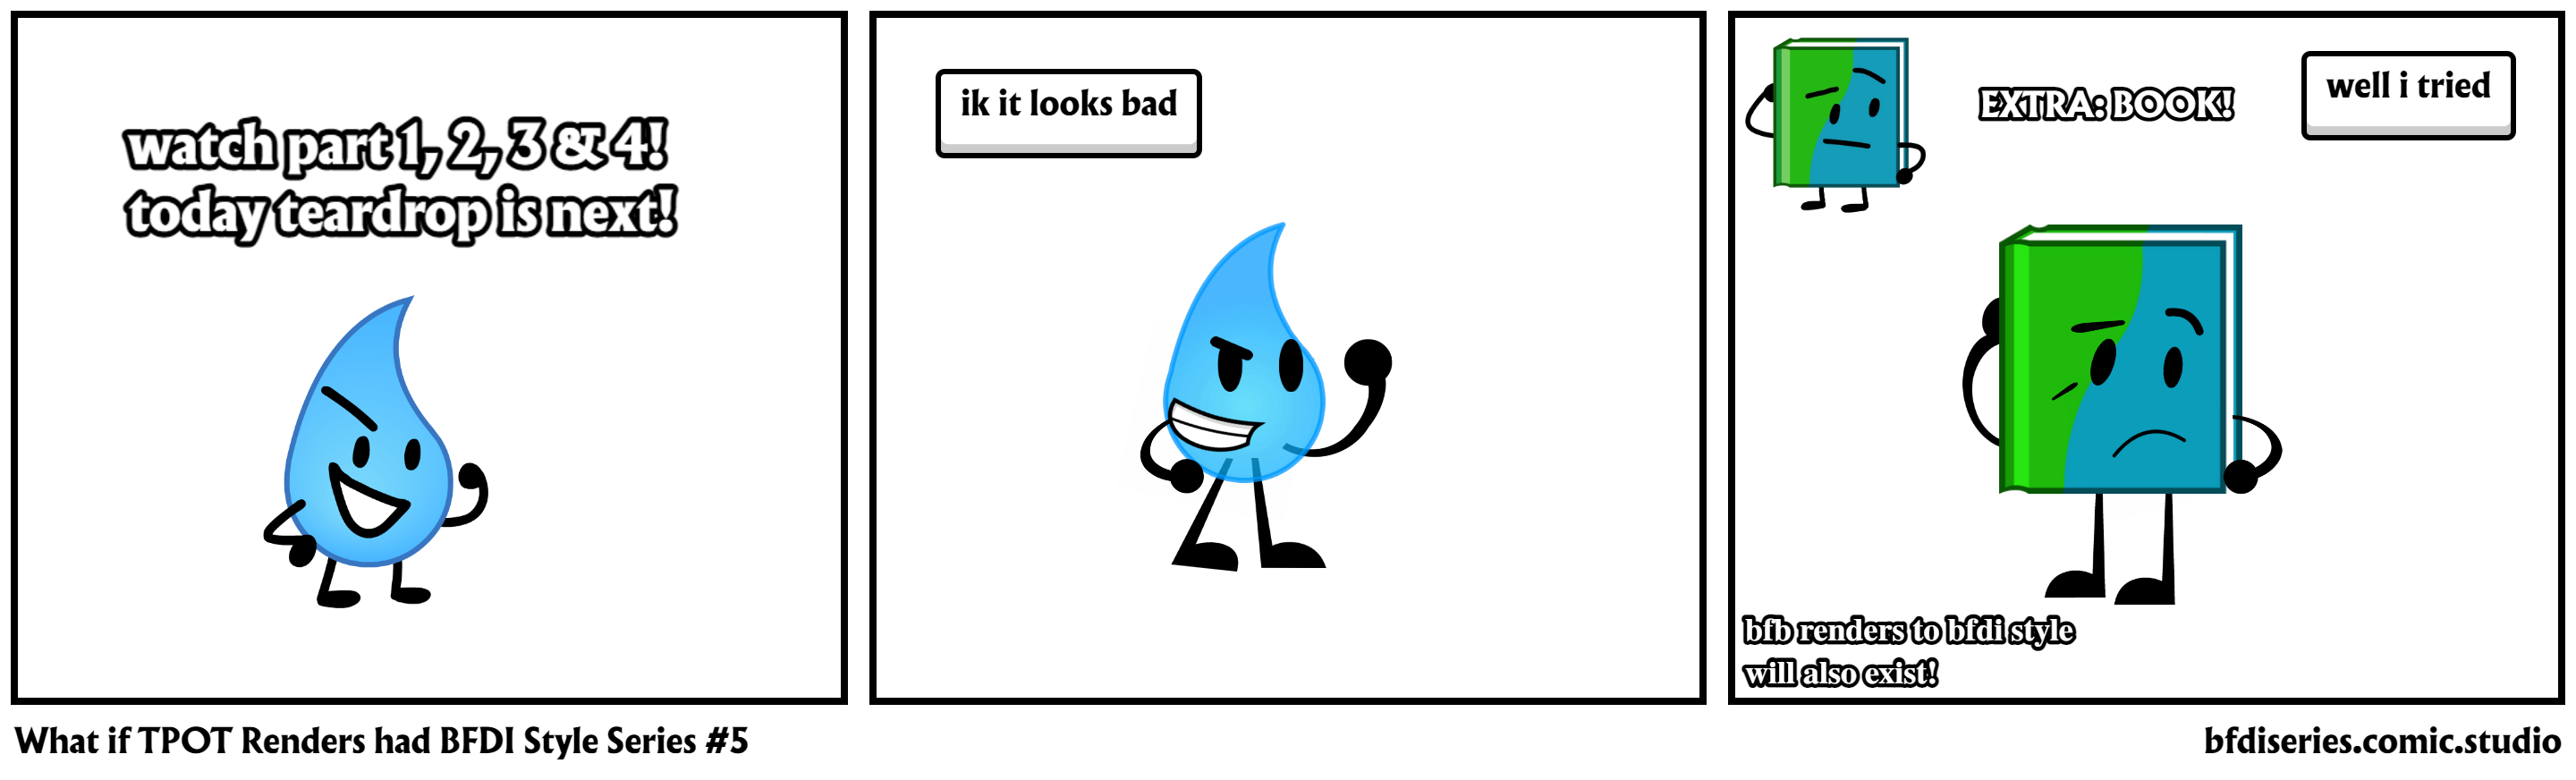 What if TPOT Renders had BFDI Style Series #5